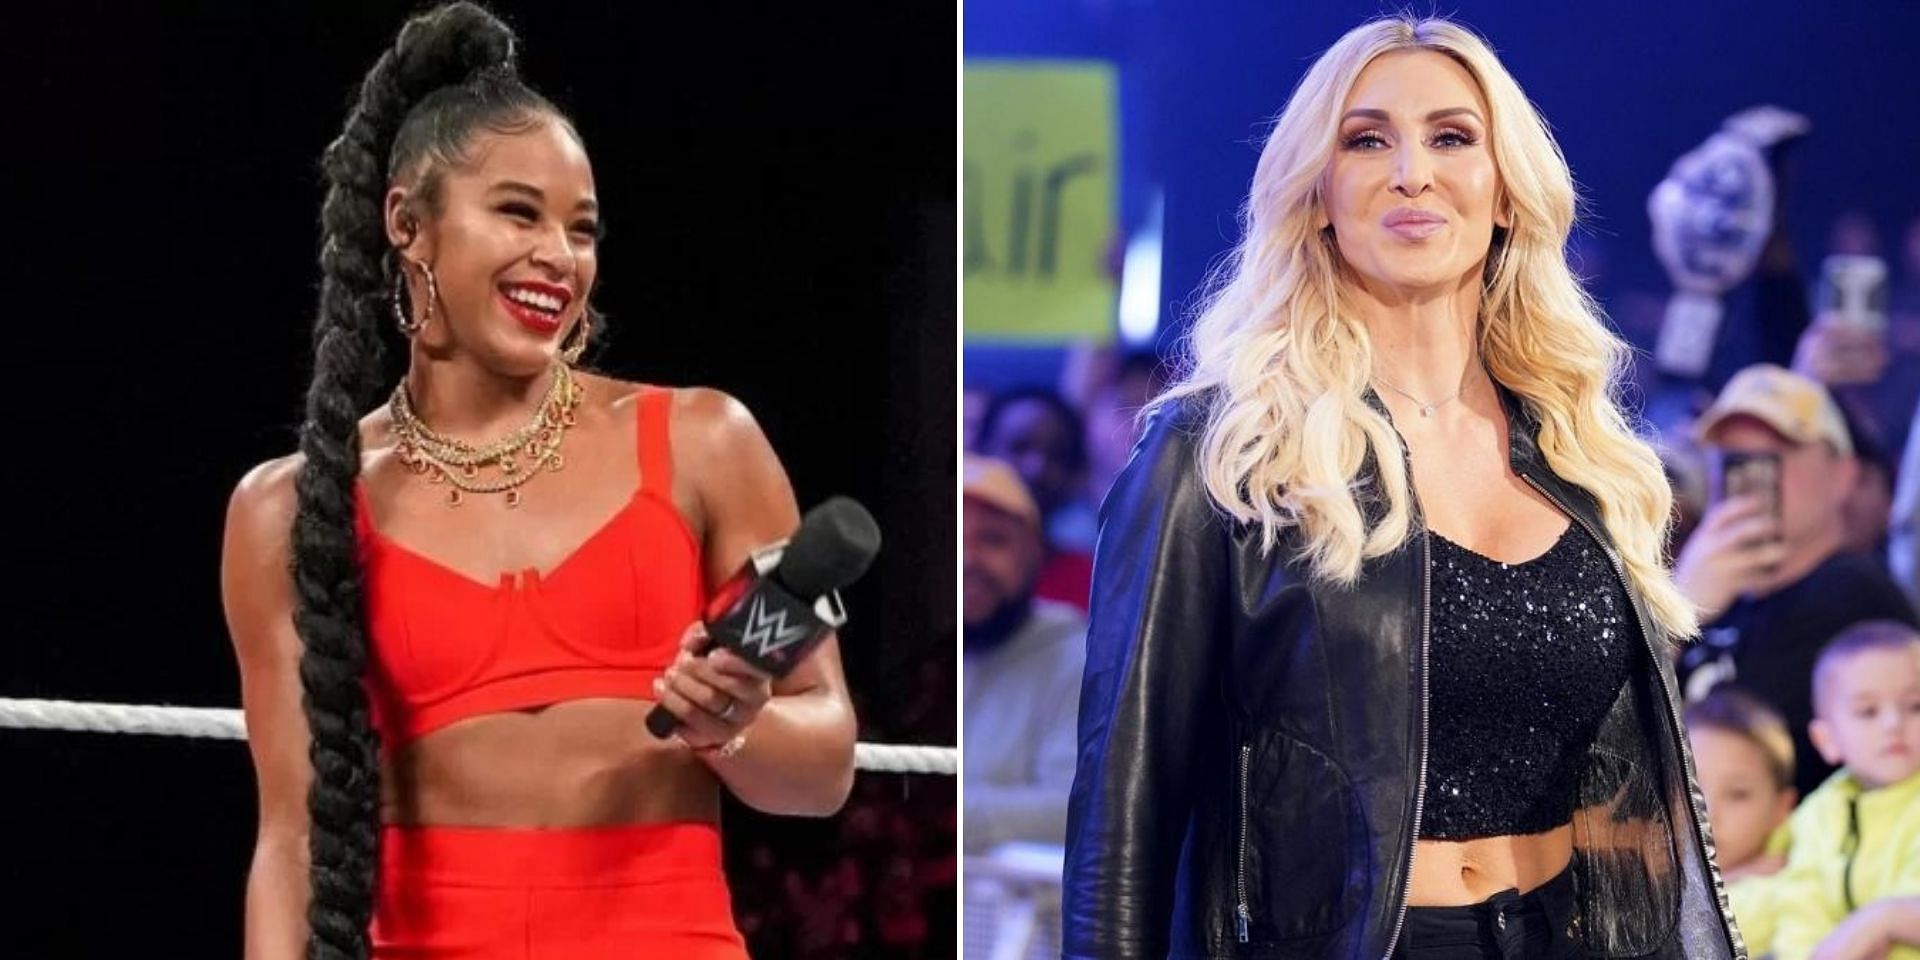 A young star wants to face Bianca Belair and Charlotte Flair